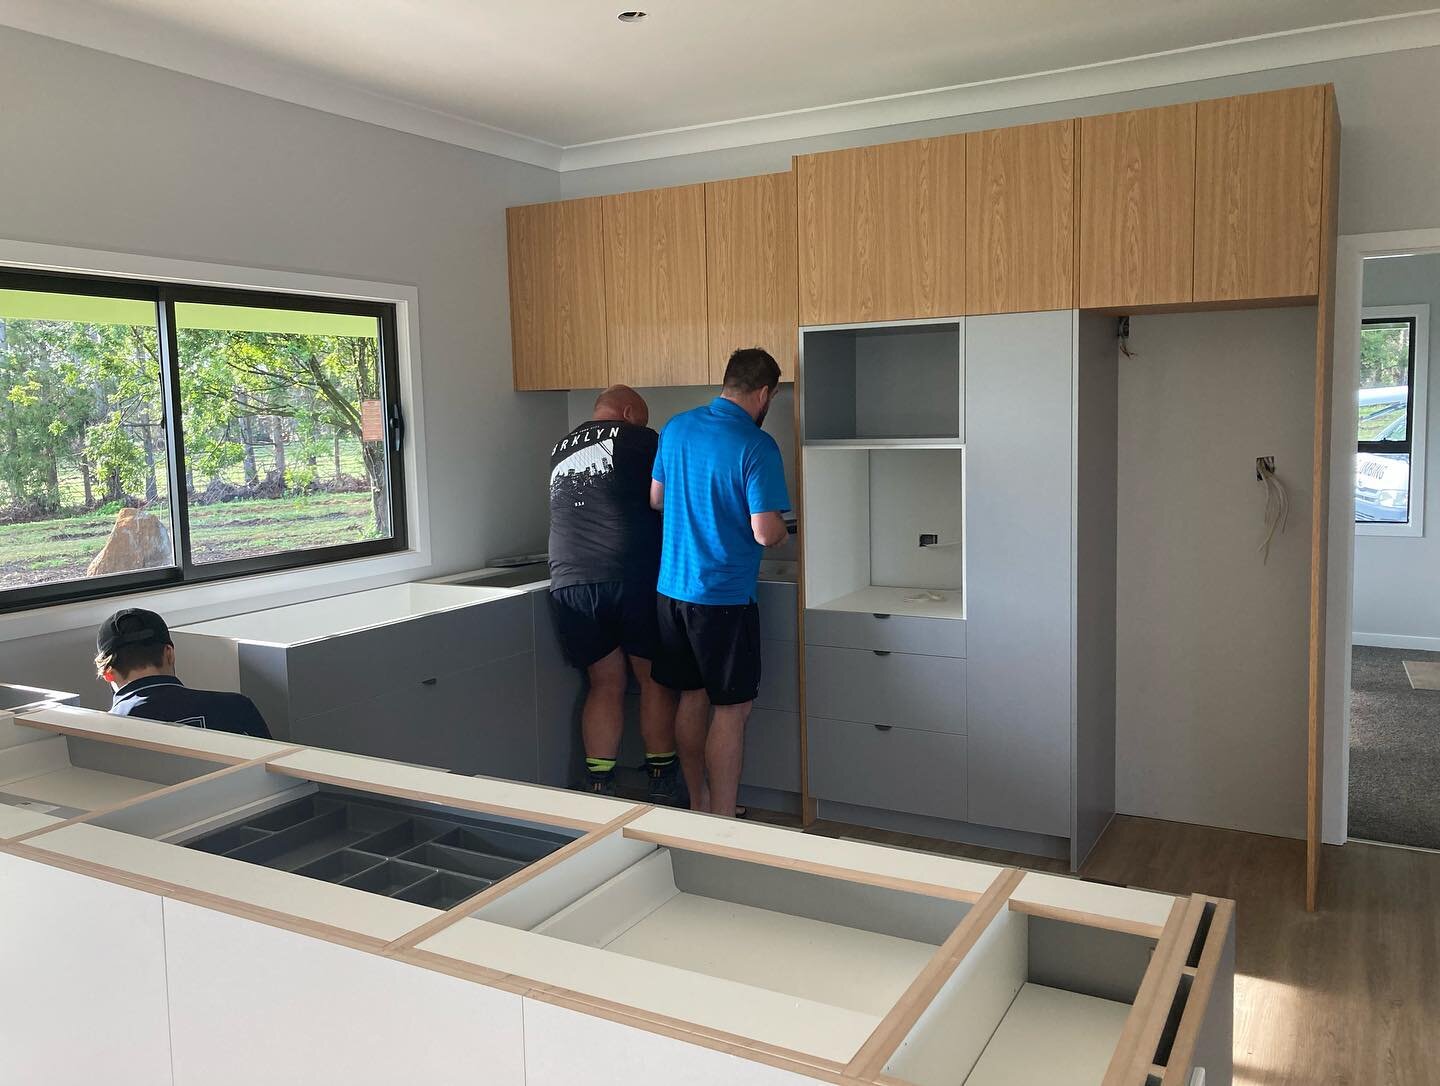 Another great Kitchen installed by @next_edition_kitchens_ltd on-site this week. This full renovation is getting close to complete